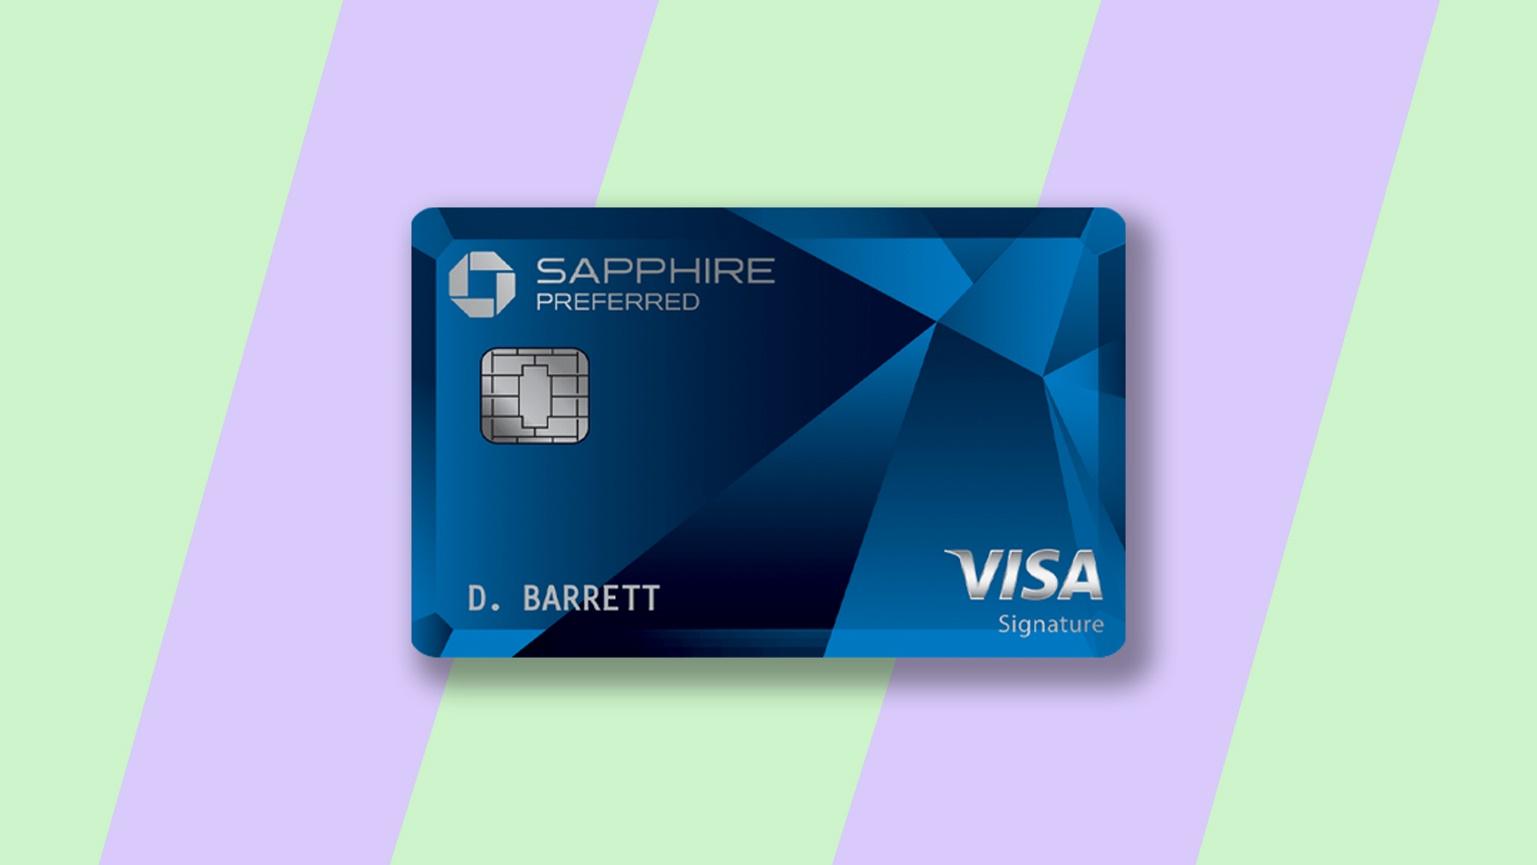 More Travel Discounts - Learn How to Order the Chase Sapphire Card